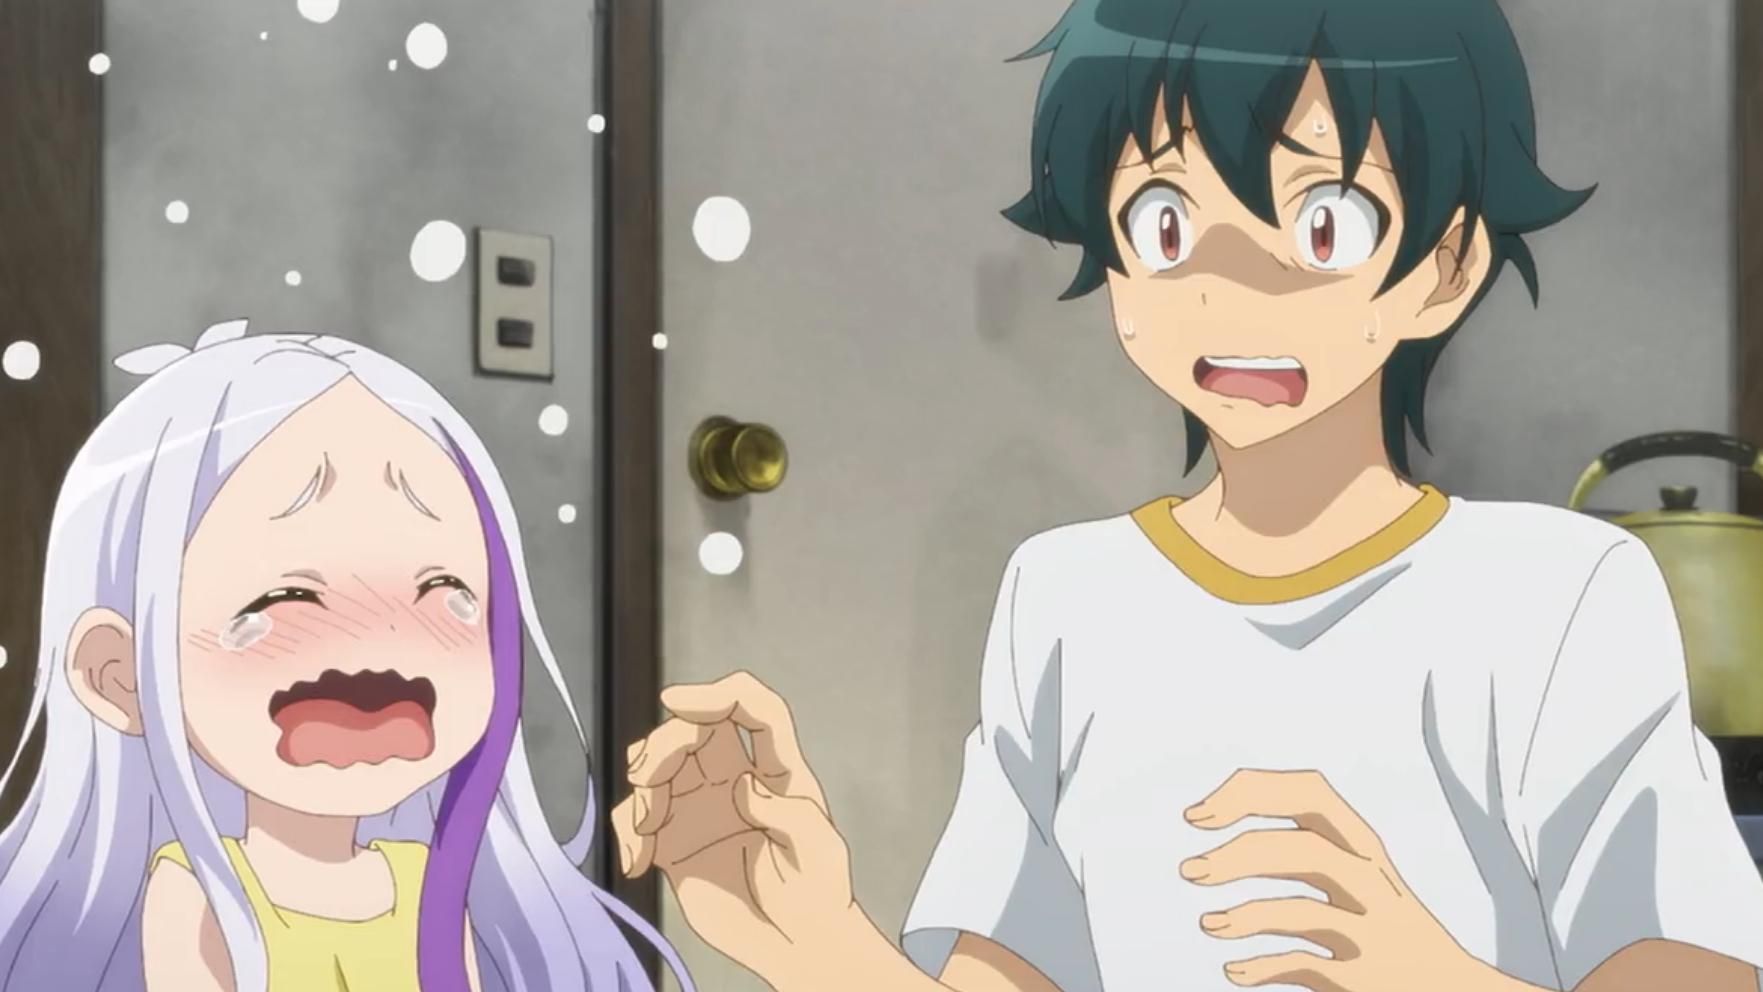 The Devil is a Part-Timer Season 3 Episode 3 Release Date & Time